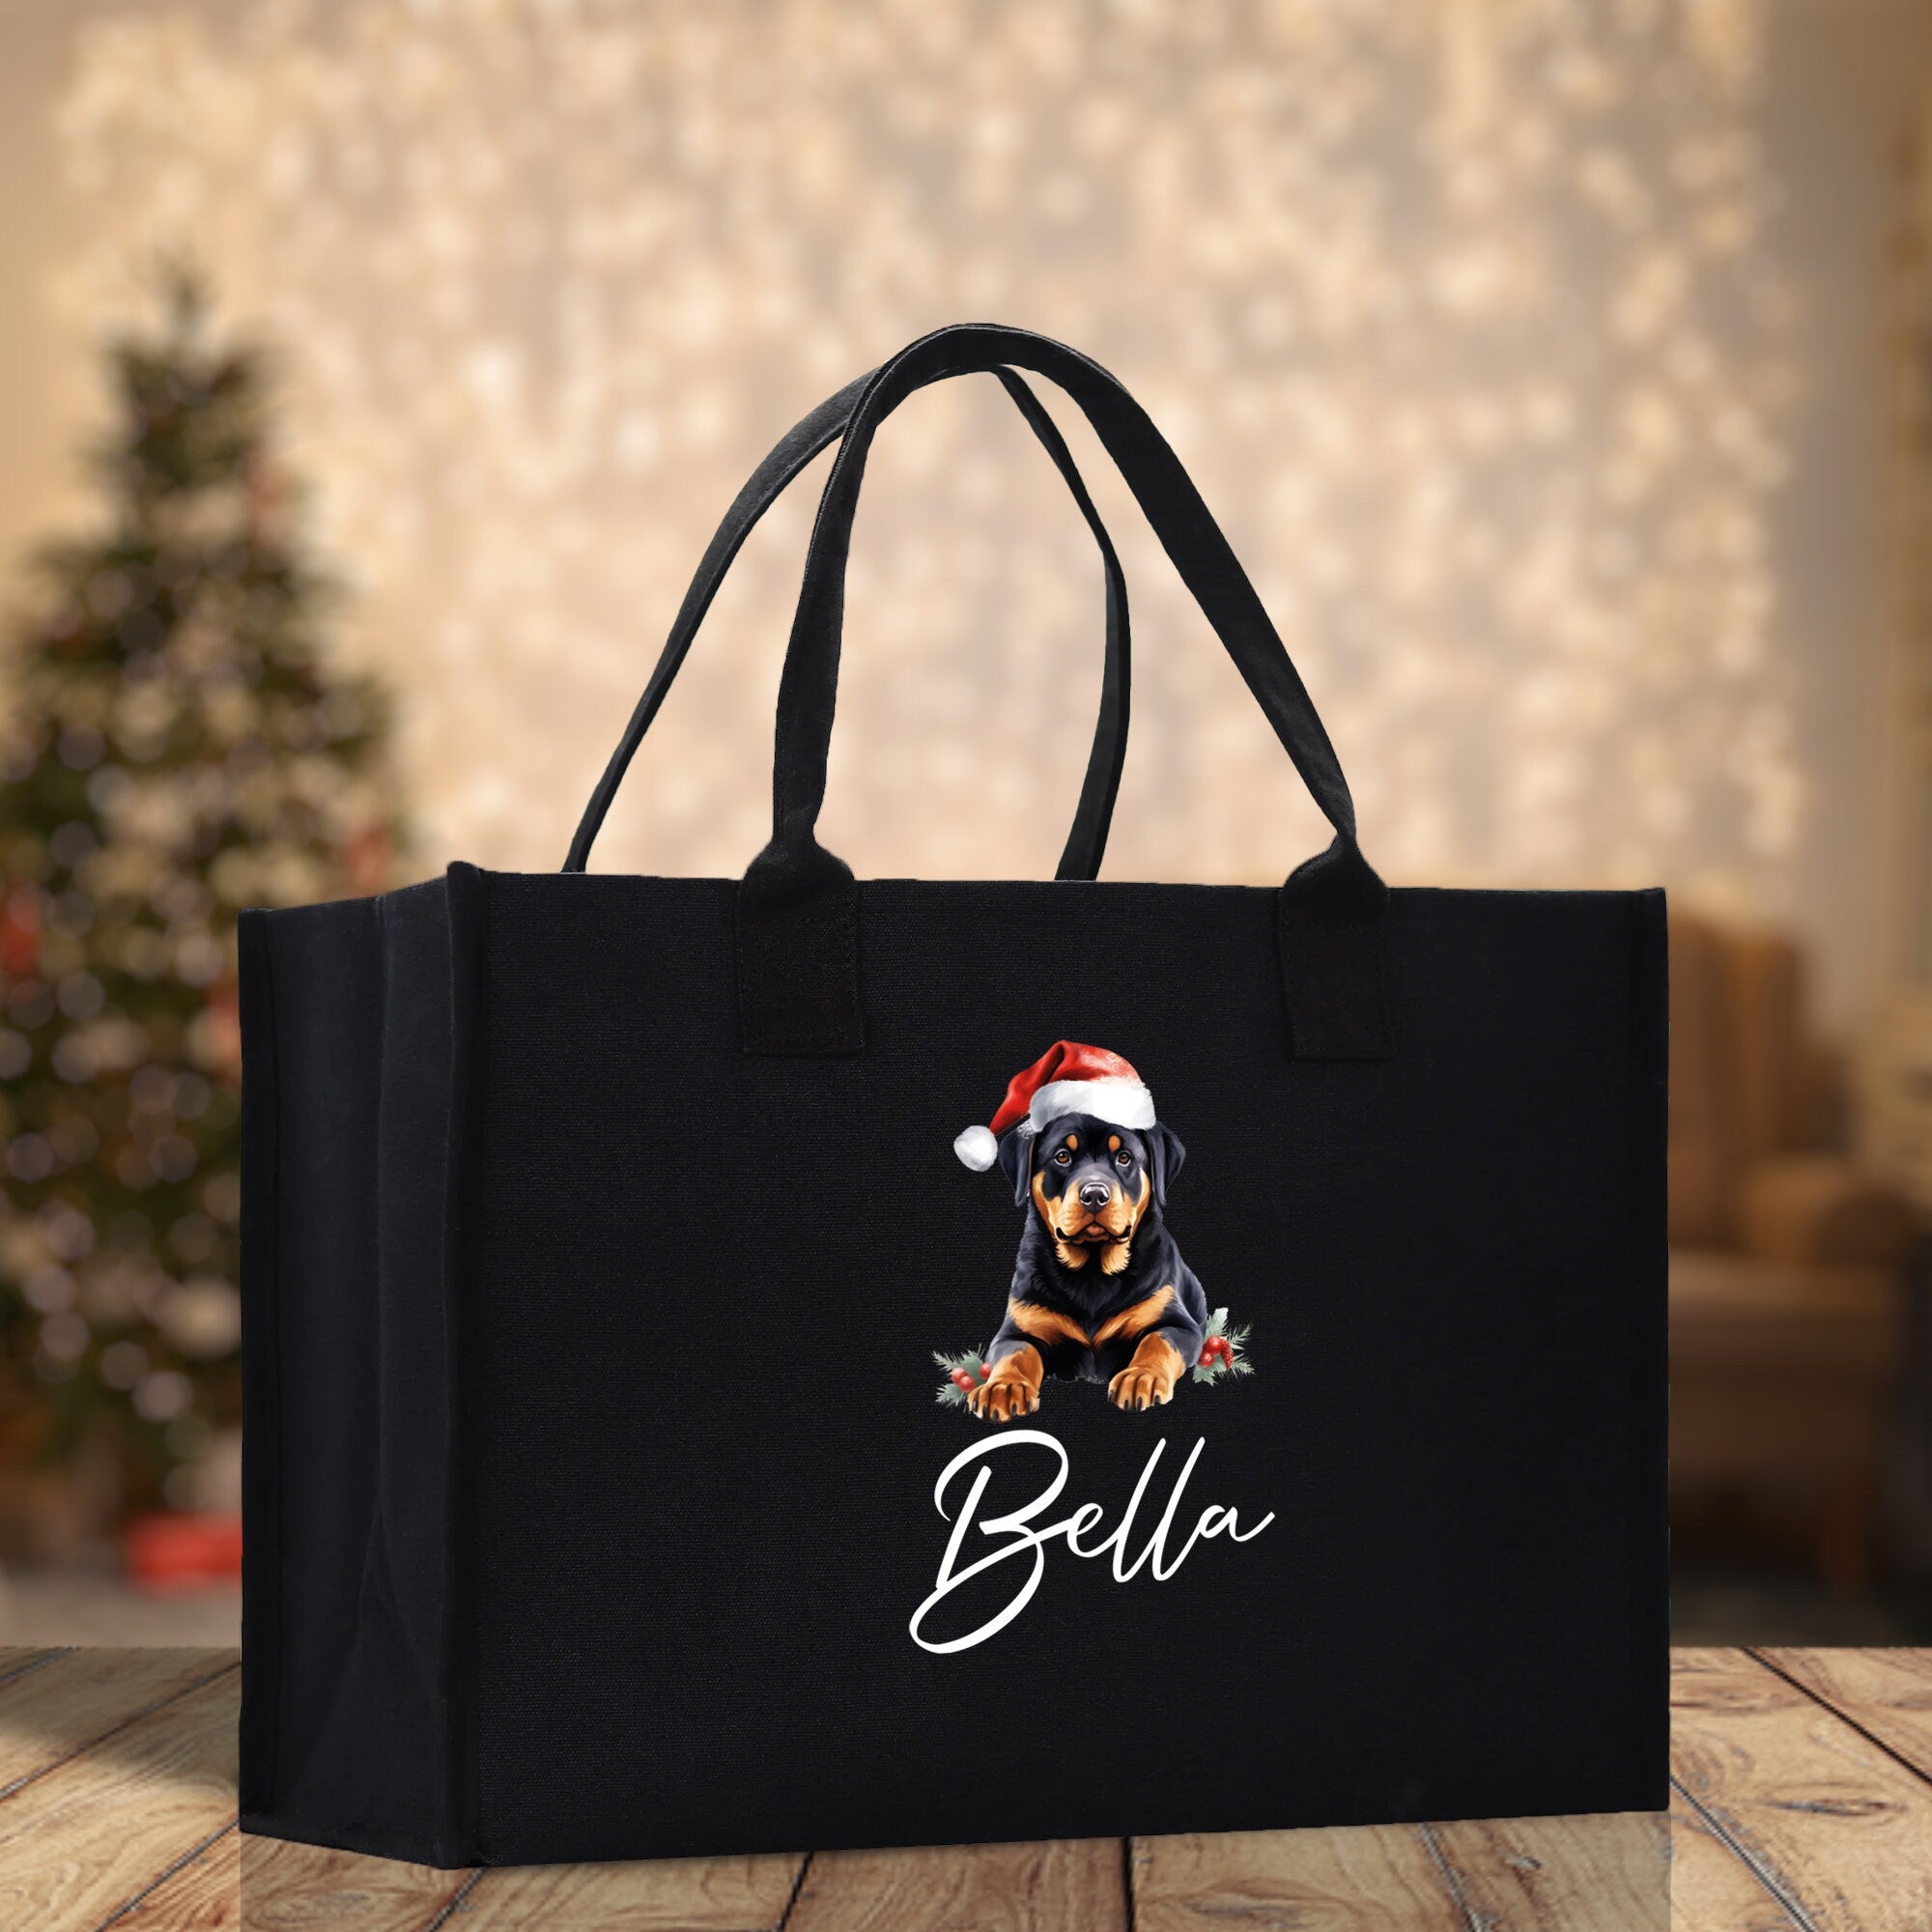 a black bag with a picture of a dog wearing a santa hat